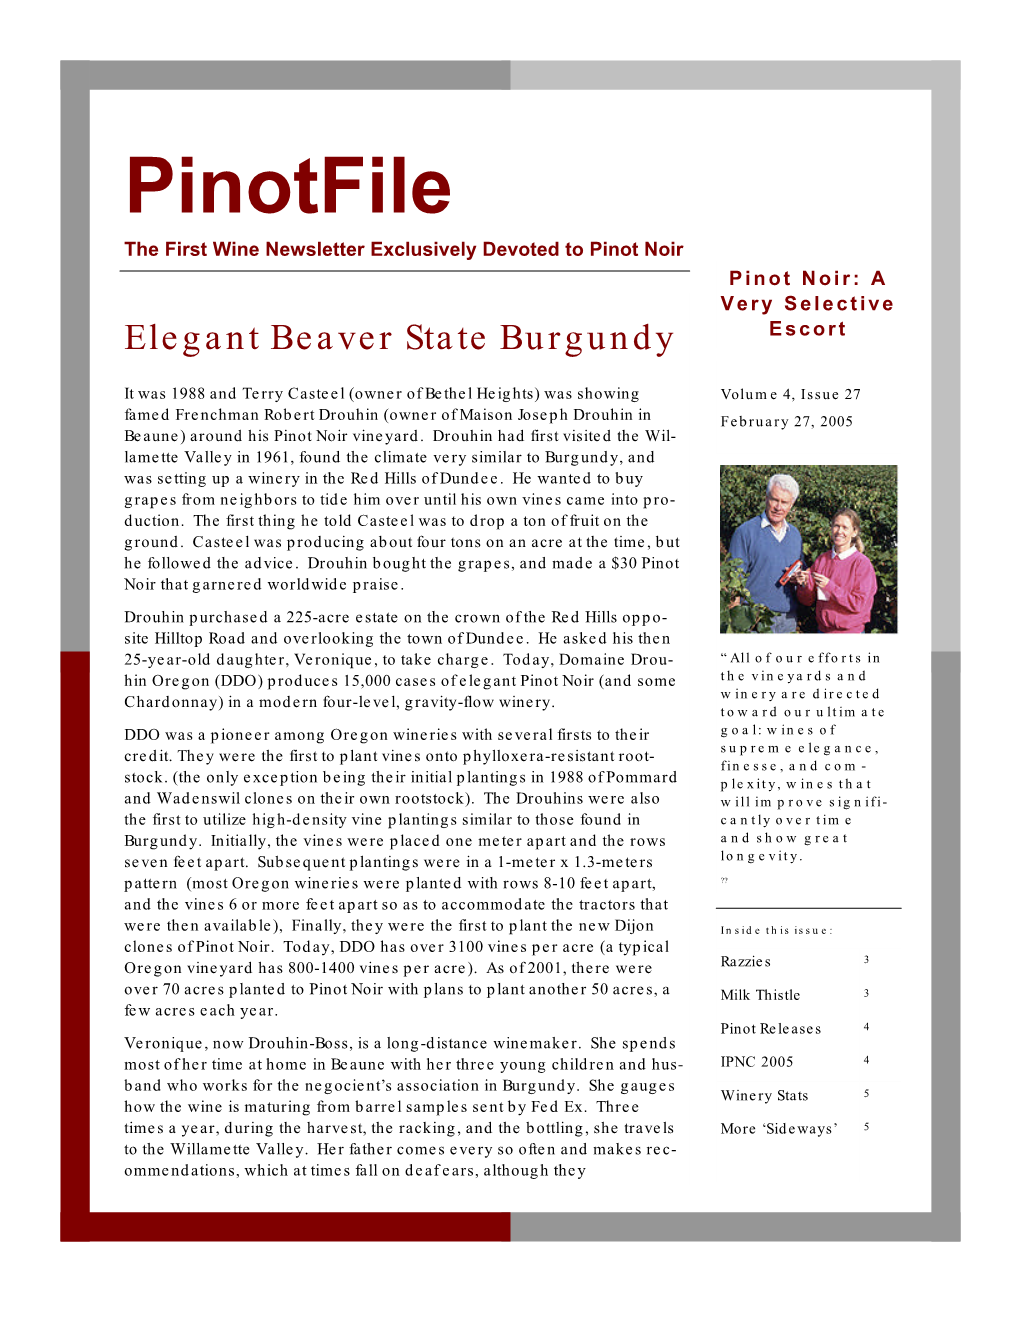 Pinotfile Vol 4, Issue 27